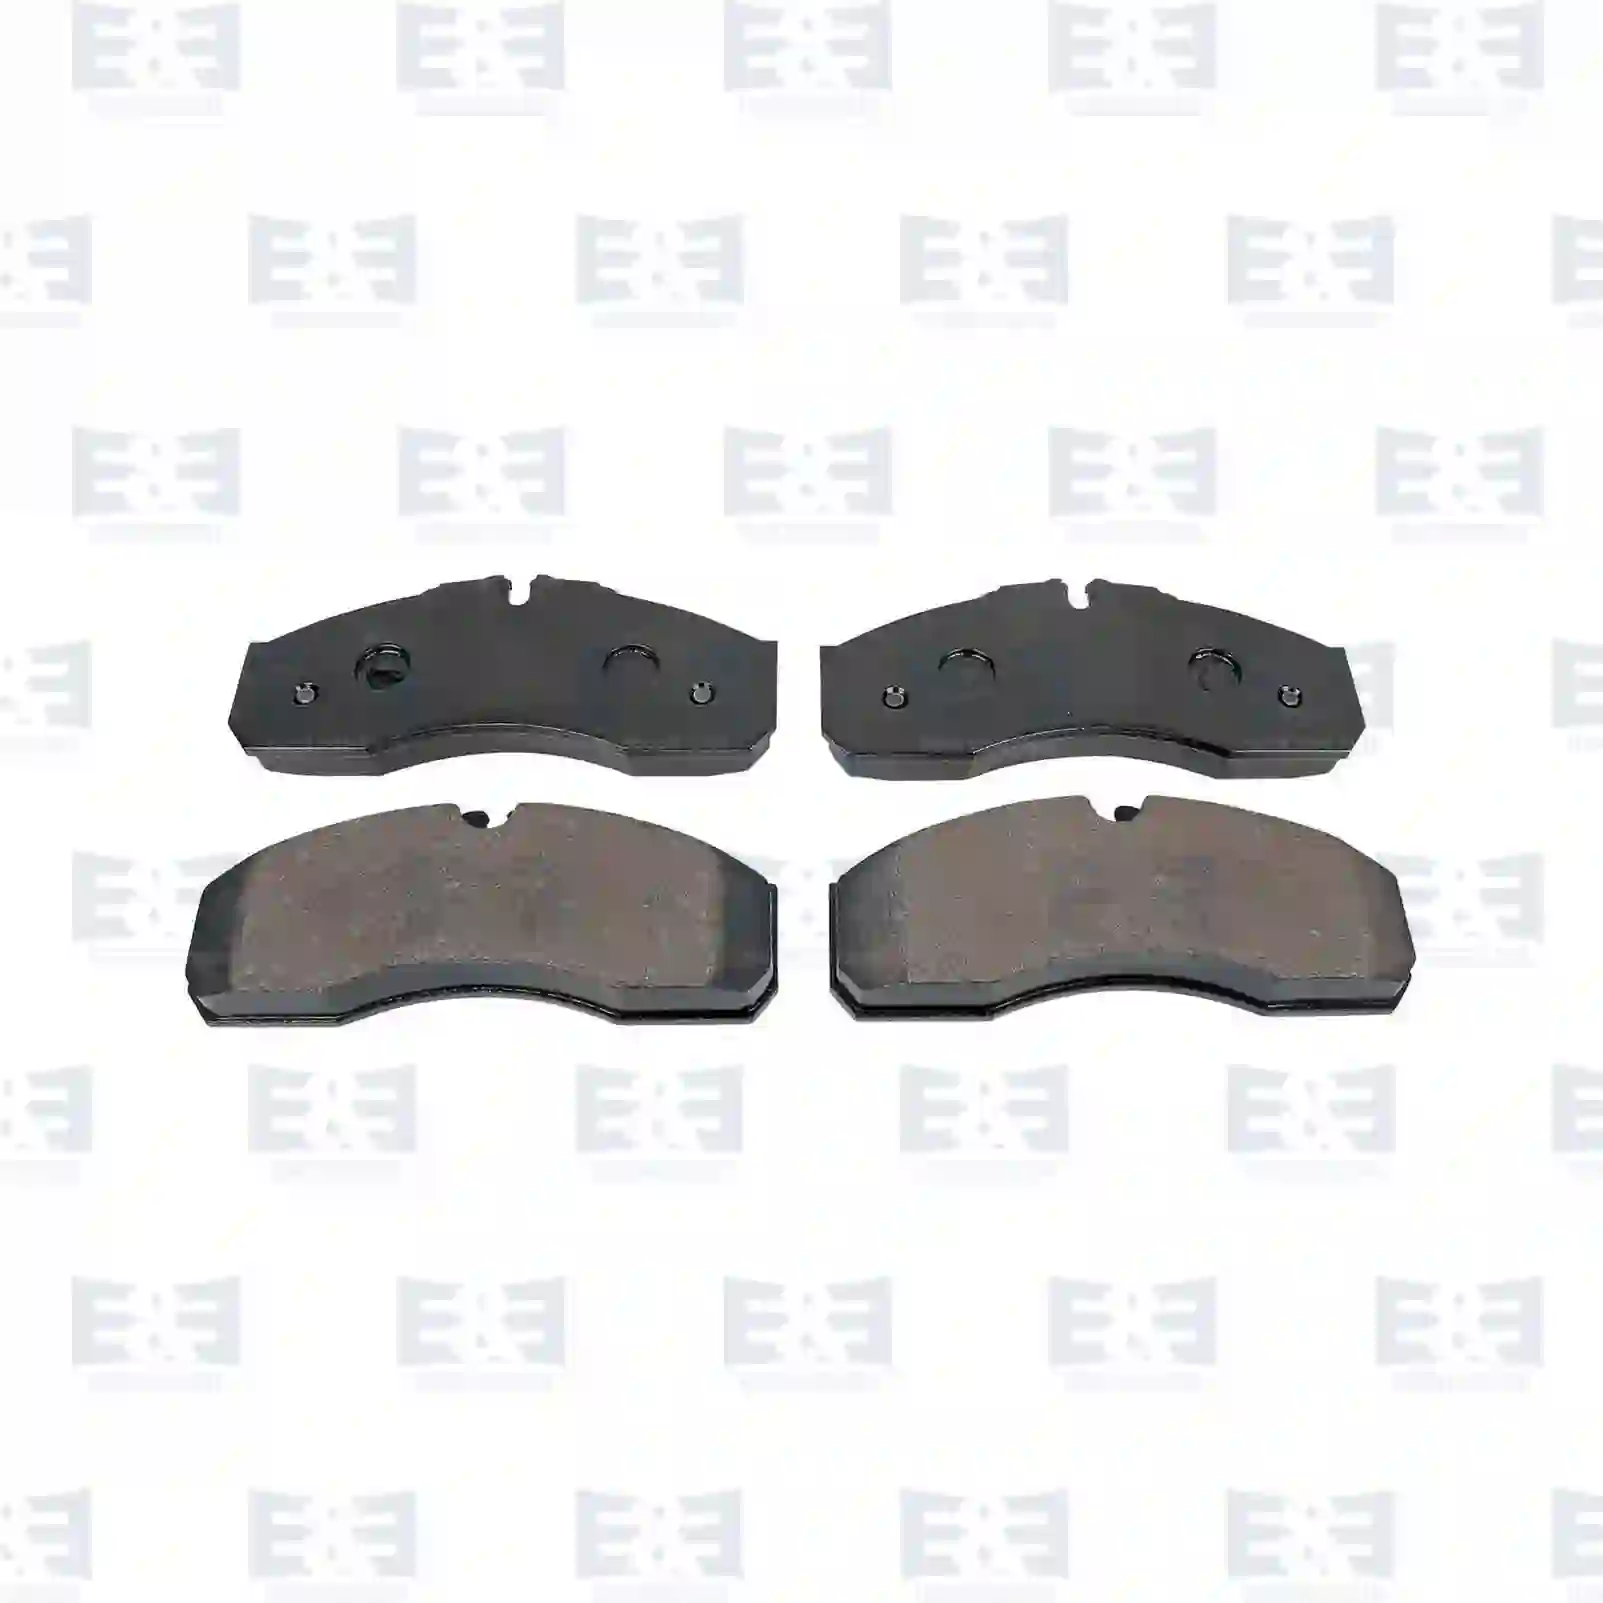 Disc brake pad kit, without accessories, 2E2295271, 02995632, 42536101, 02995632, 02996532, 42535782, 42536101, 5001844748, 0034204620, 41060-MB625, 50018-44748, 5001844748, ZG50441-0008 ||  2E2295271 E&E Truck Spare Parts | Truck Spare Parts, Auotomotive Spare Parts Disc brake pad kit, without accessories, 2E2295271, 02995632, 42536101, 02995632, 02996532, 42535782, 42536101, 5001844748, 0034204620, 41060-MB625, 50018-44748, 5001844748, ZG50441-0008 ||  2E2295271 E&E Truck Spare Parts | Truck Spare Parts, Auotomotive Spare Parts